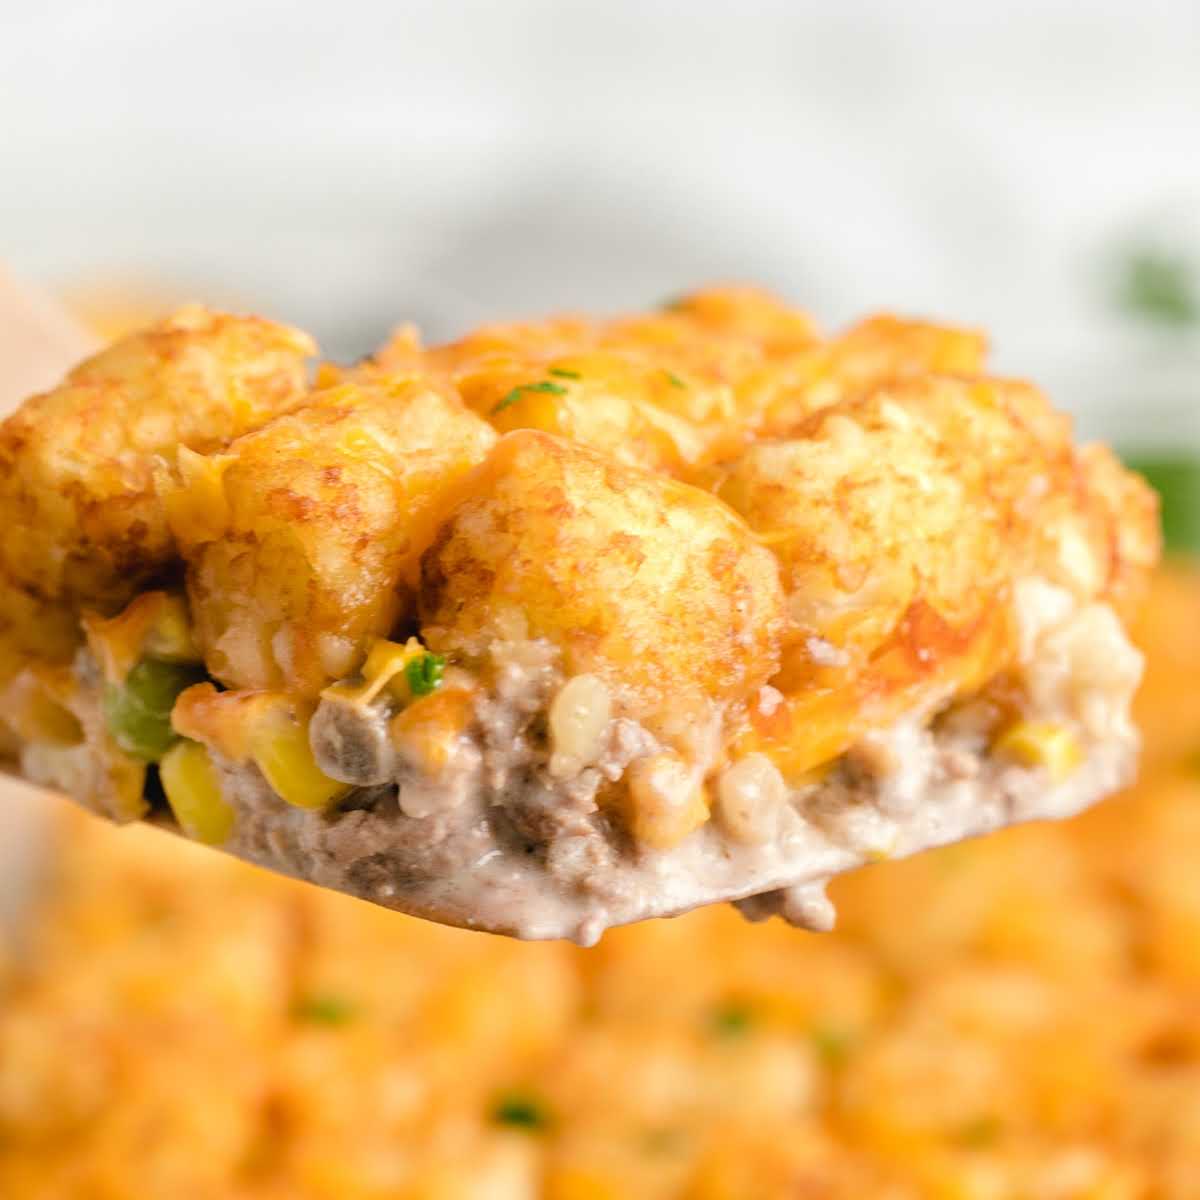 The Best Recipe for Tater Tot Casserole - Spaceships and Laser Beams